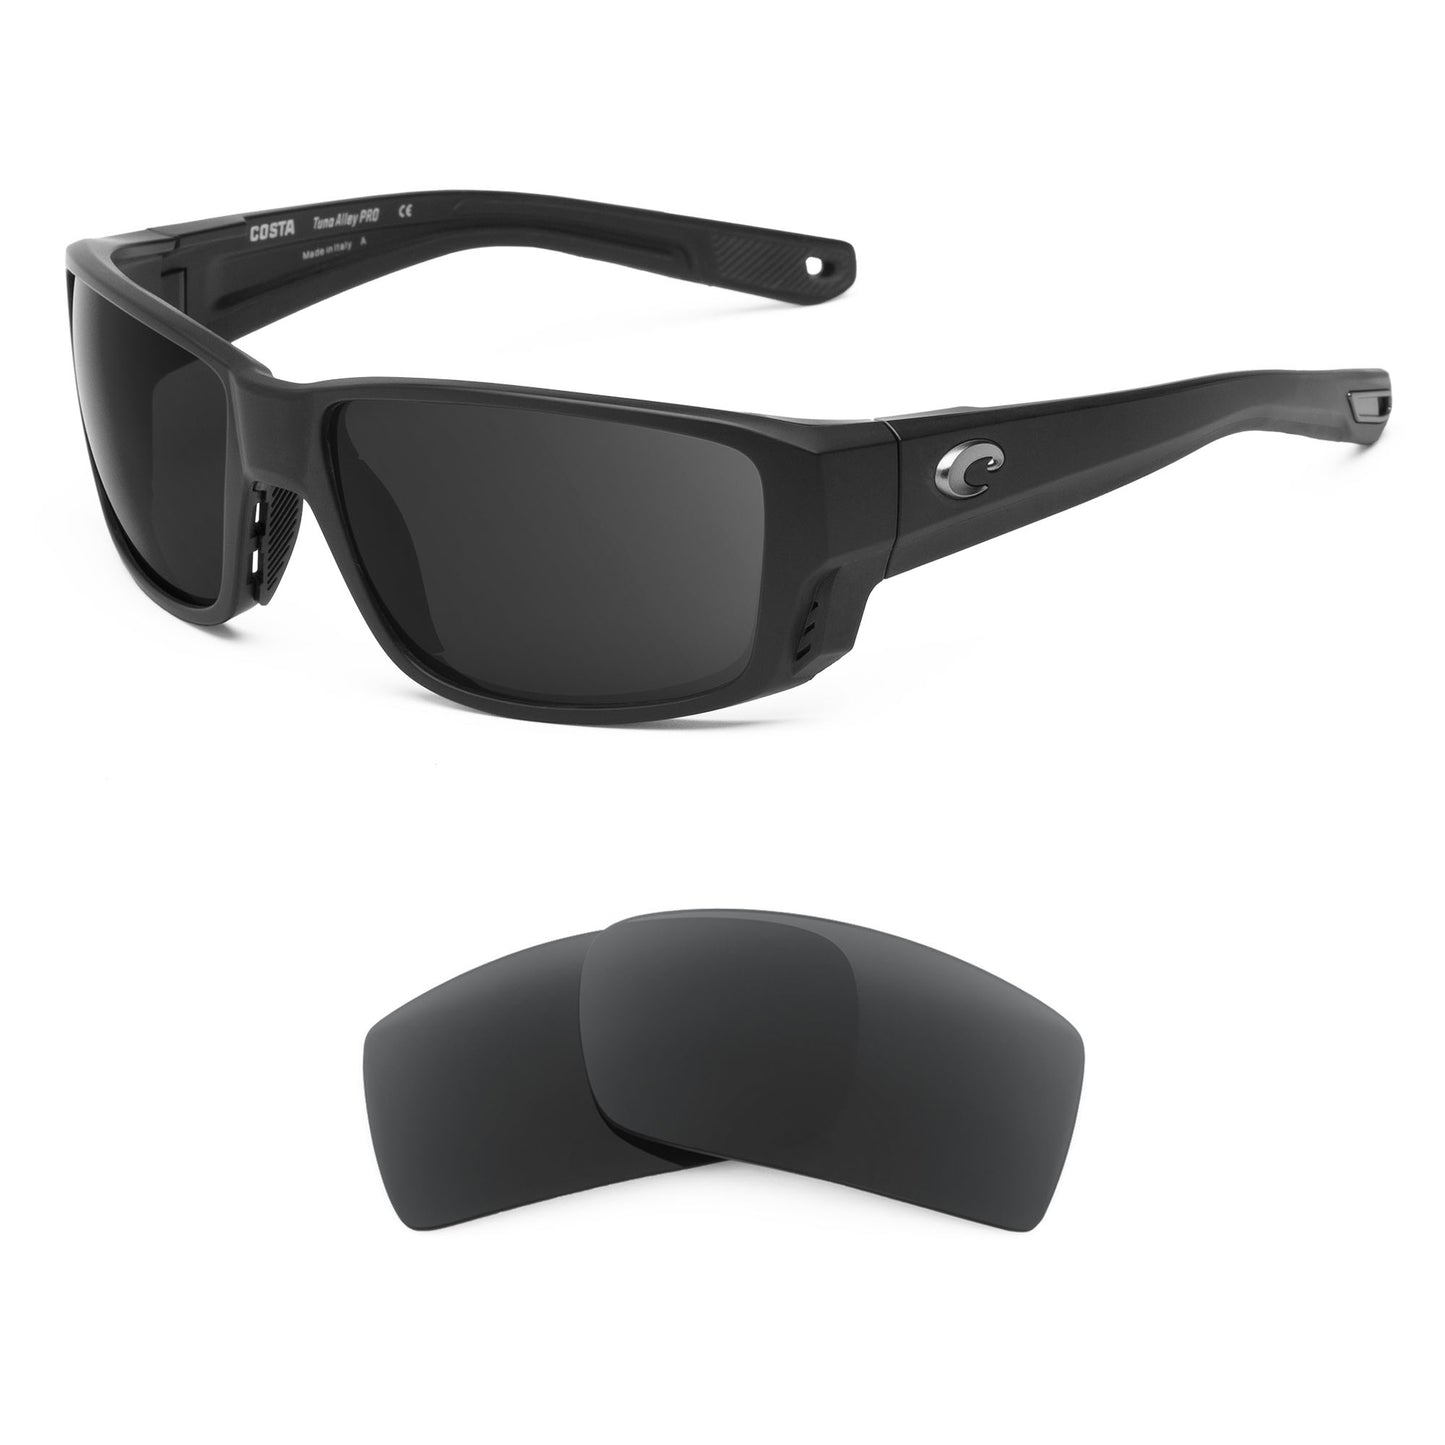 Costa Tuna Alley Pro sunglasses with replacement lenses